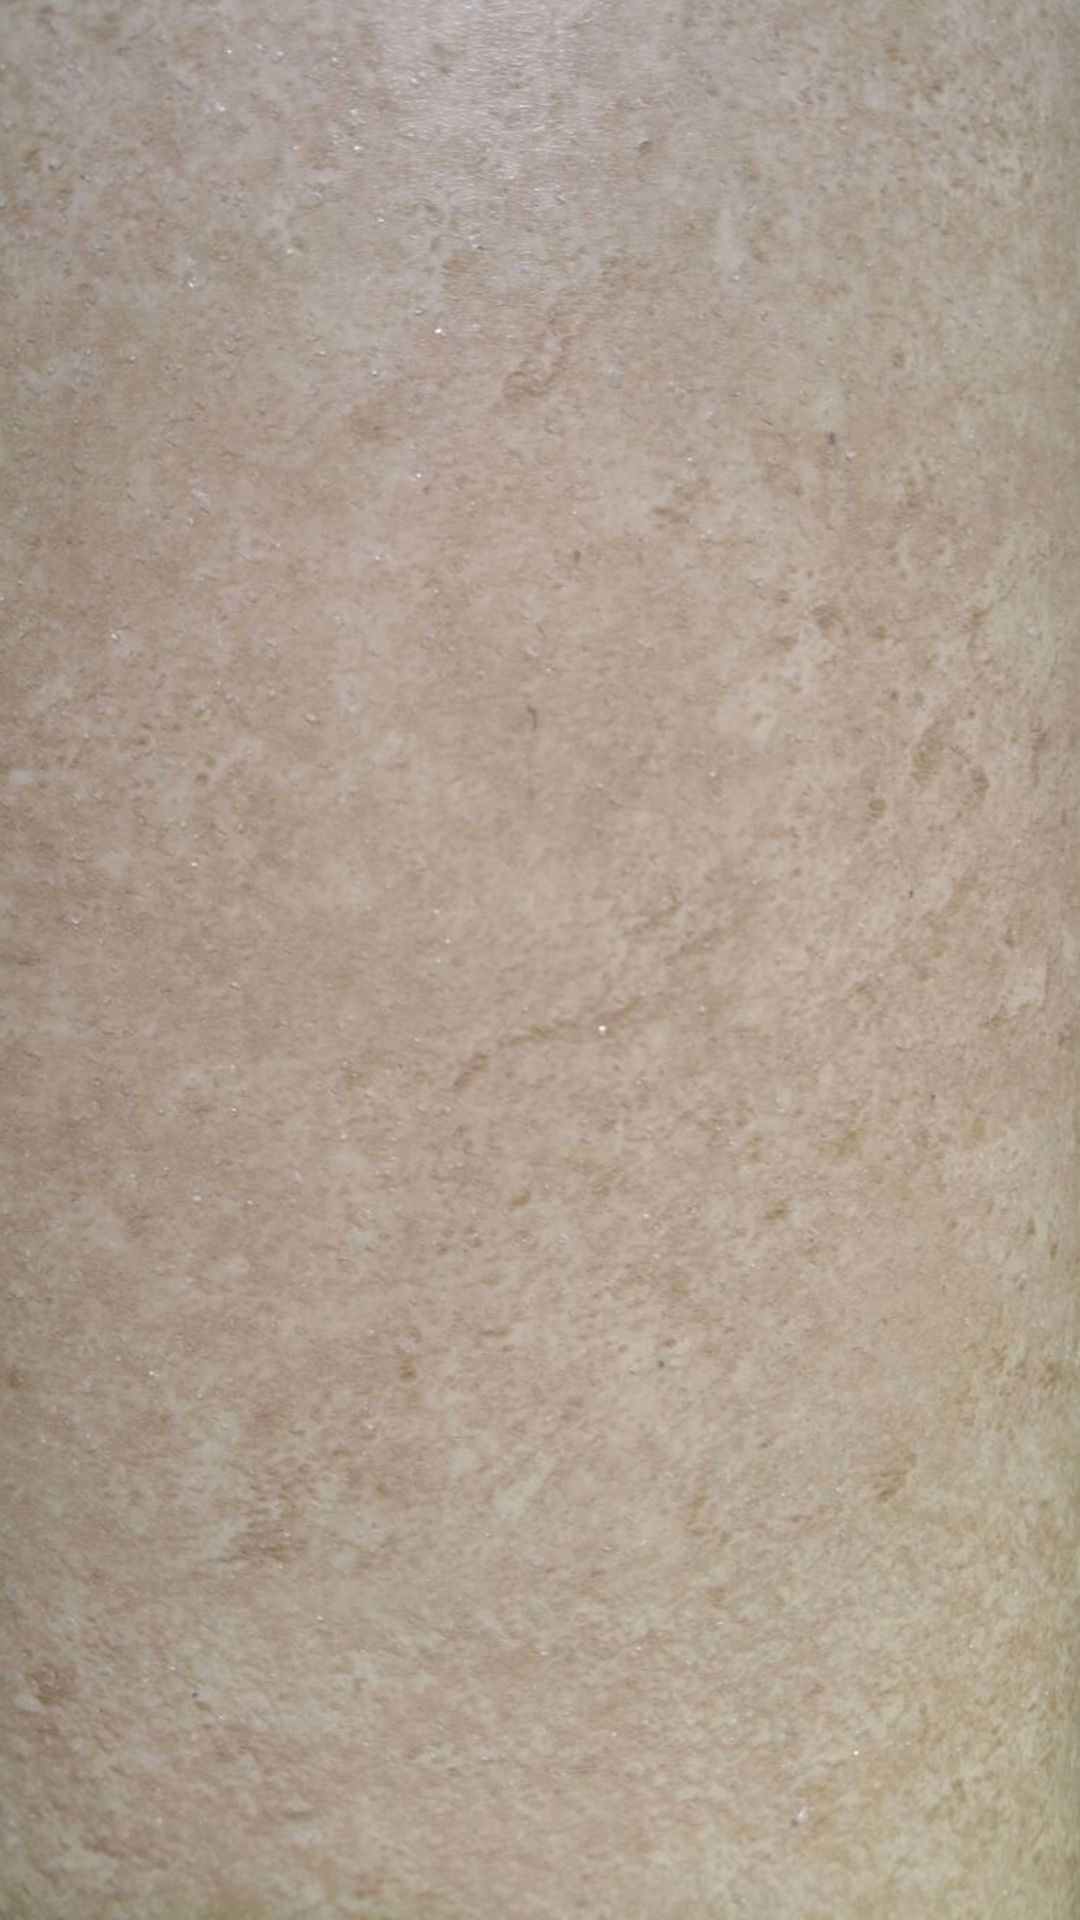 Tarkett Natural - Limestone The Safetred Design family allows specifiers and end users to select a